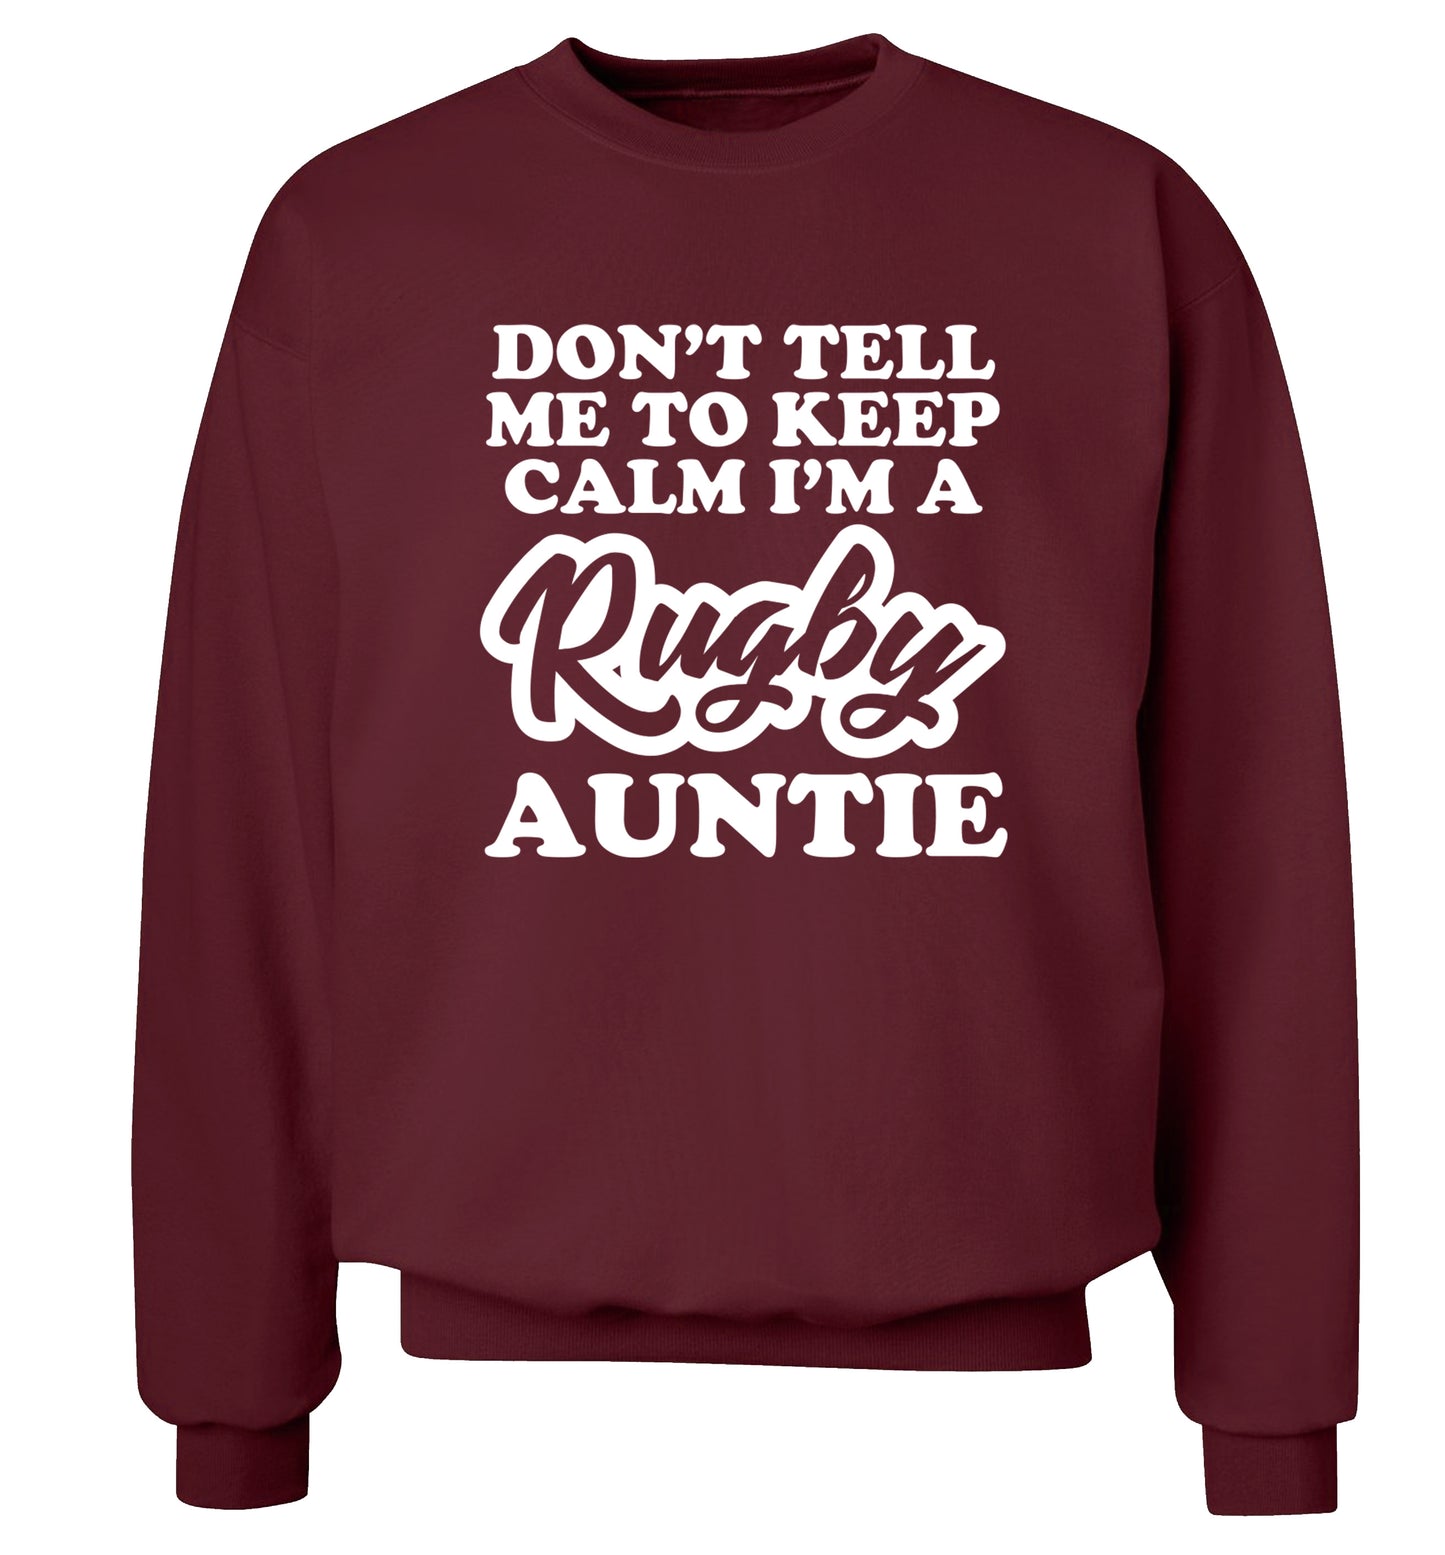 Don't tell me keep calm I'm a rugby auntie Adult's unisex maroon Sweater 2XL